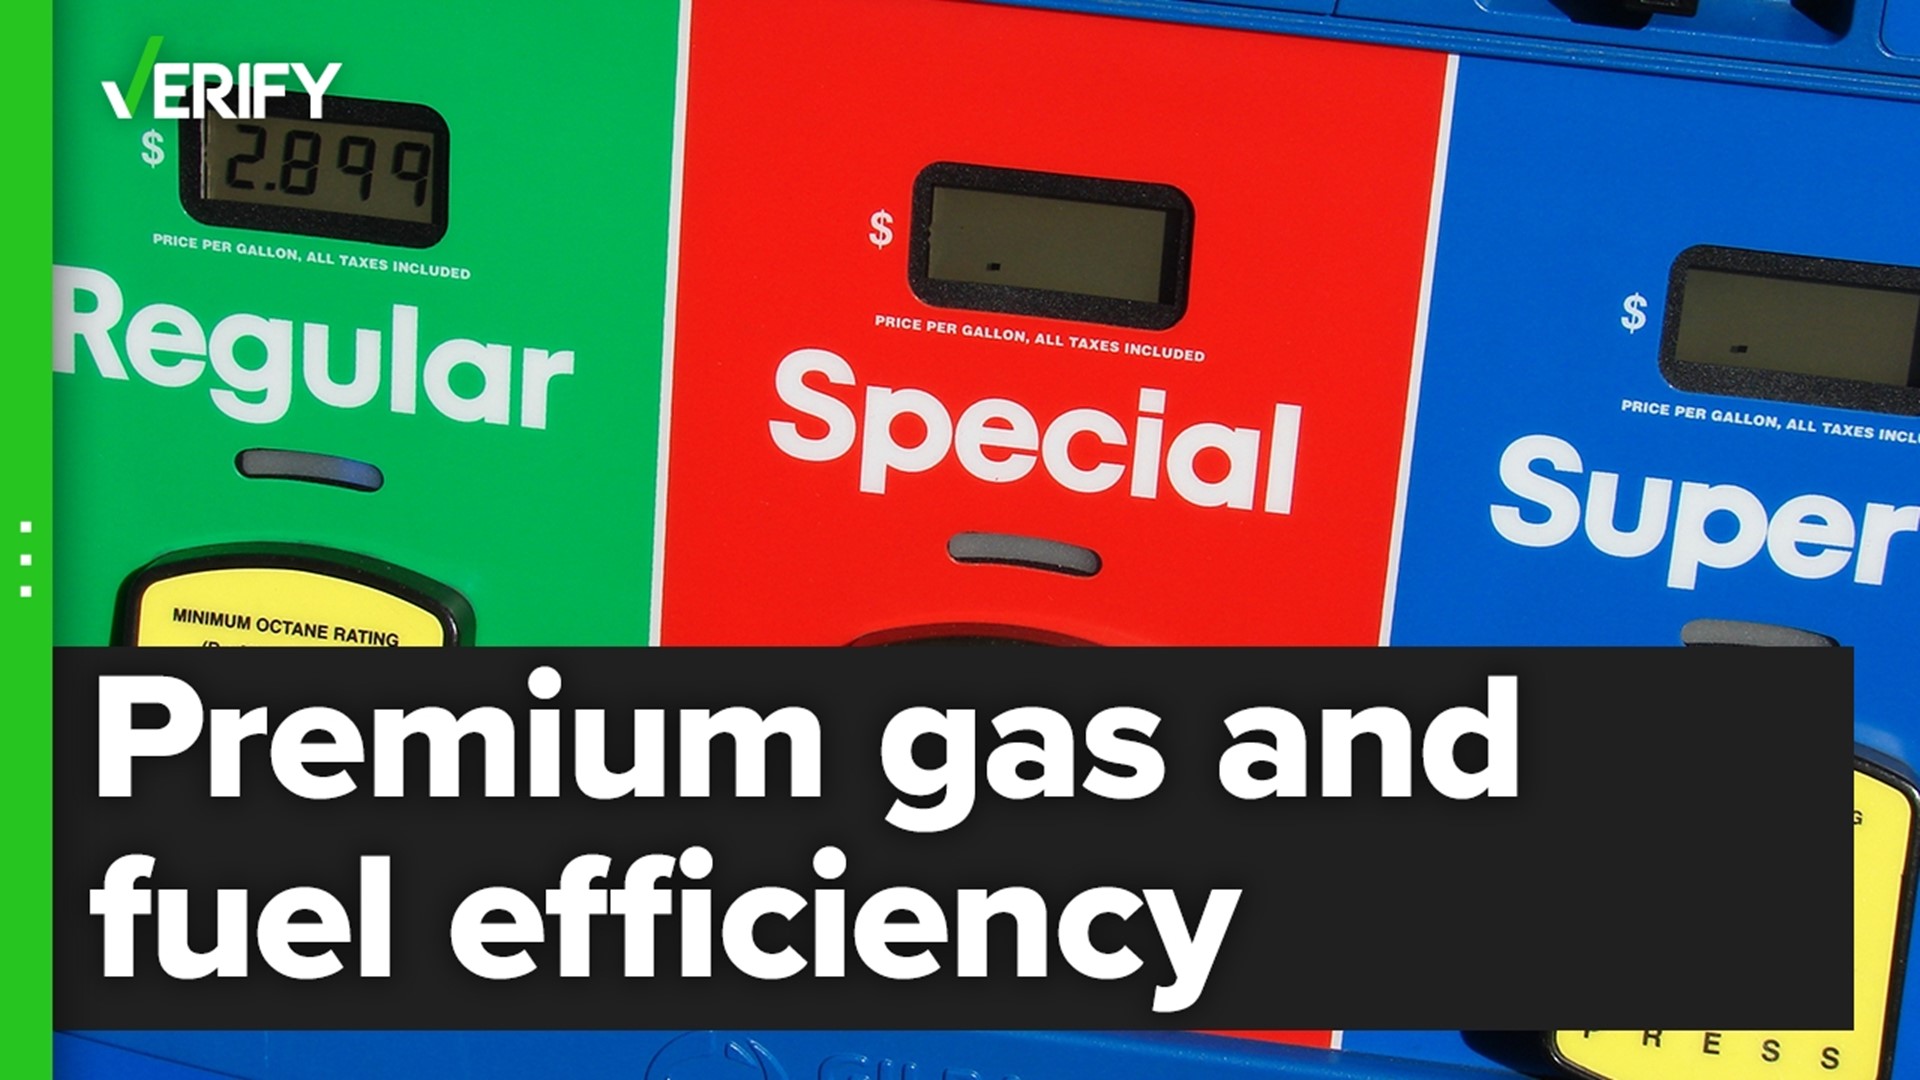 High-octane gas rarely improves mileage, and when it does, the benefit is outweighed by the premium cost.